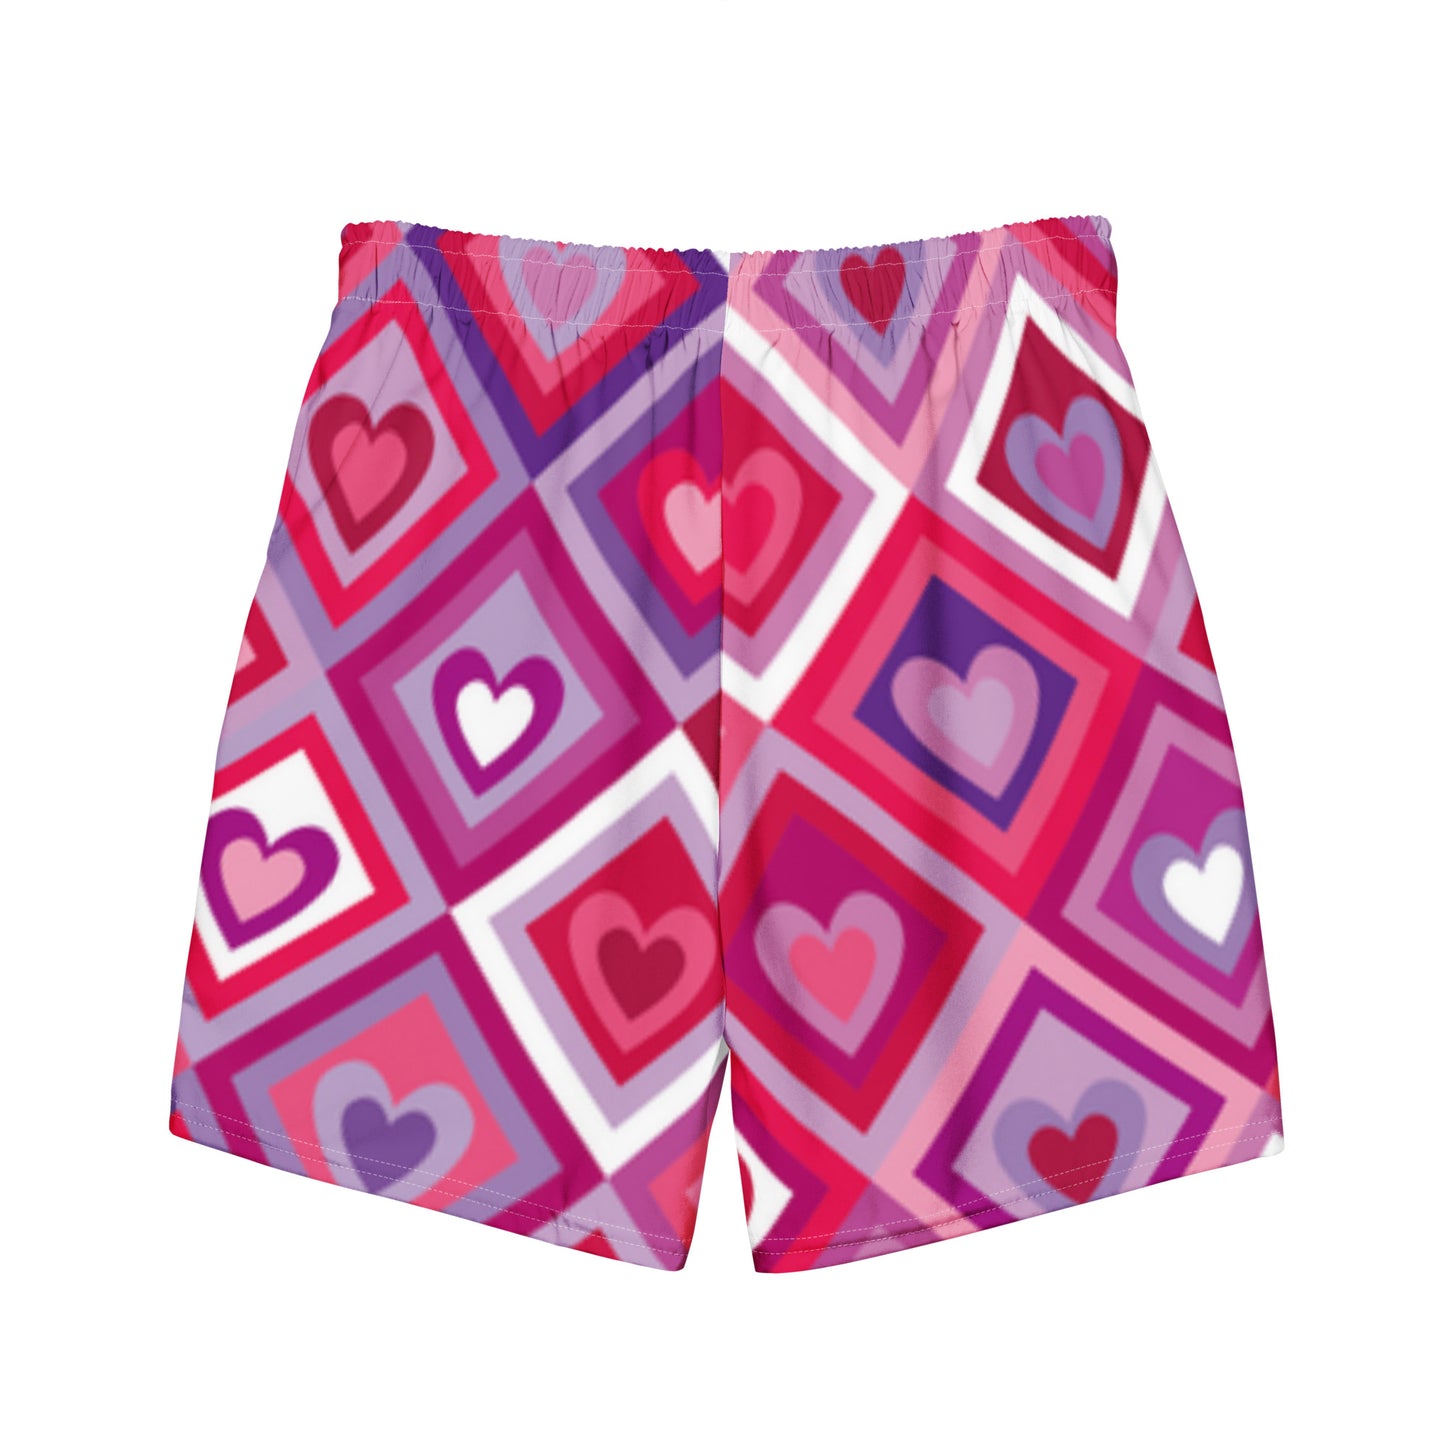 All-Over Print Recycled Swim Trunks: Loving Hearts